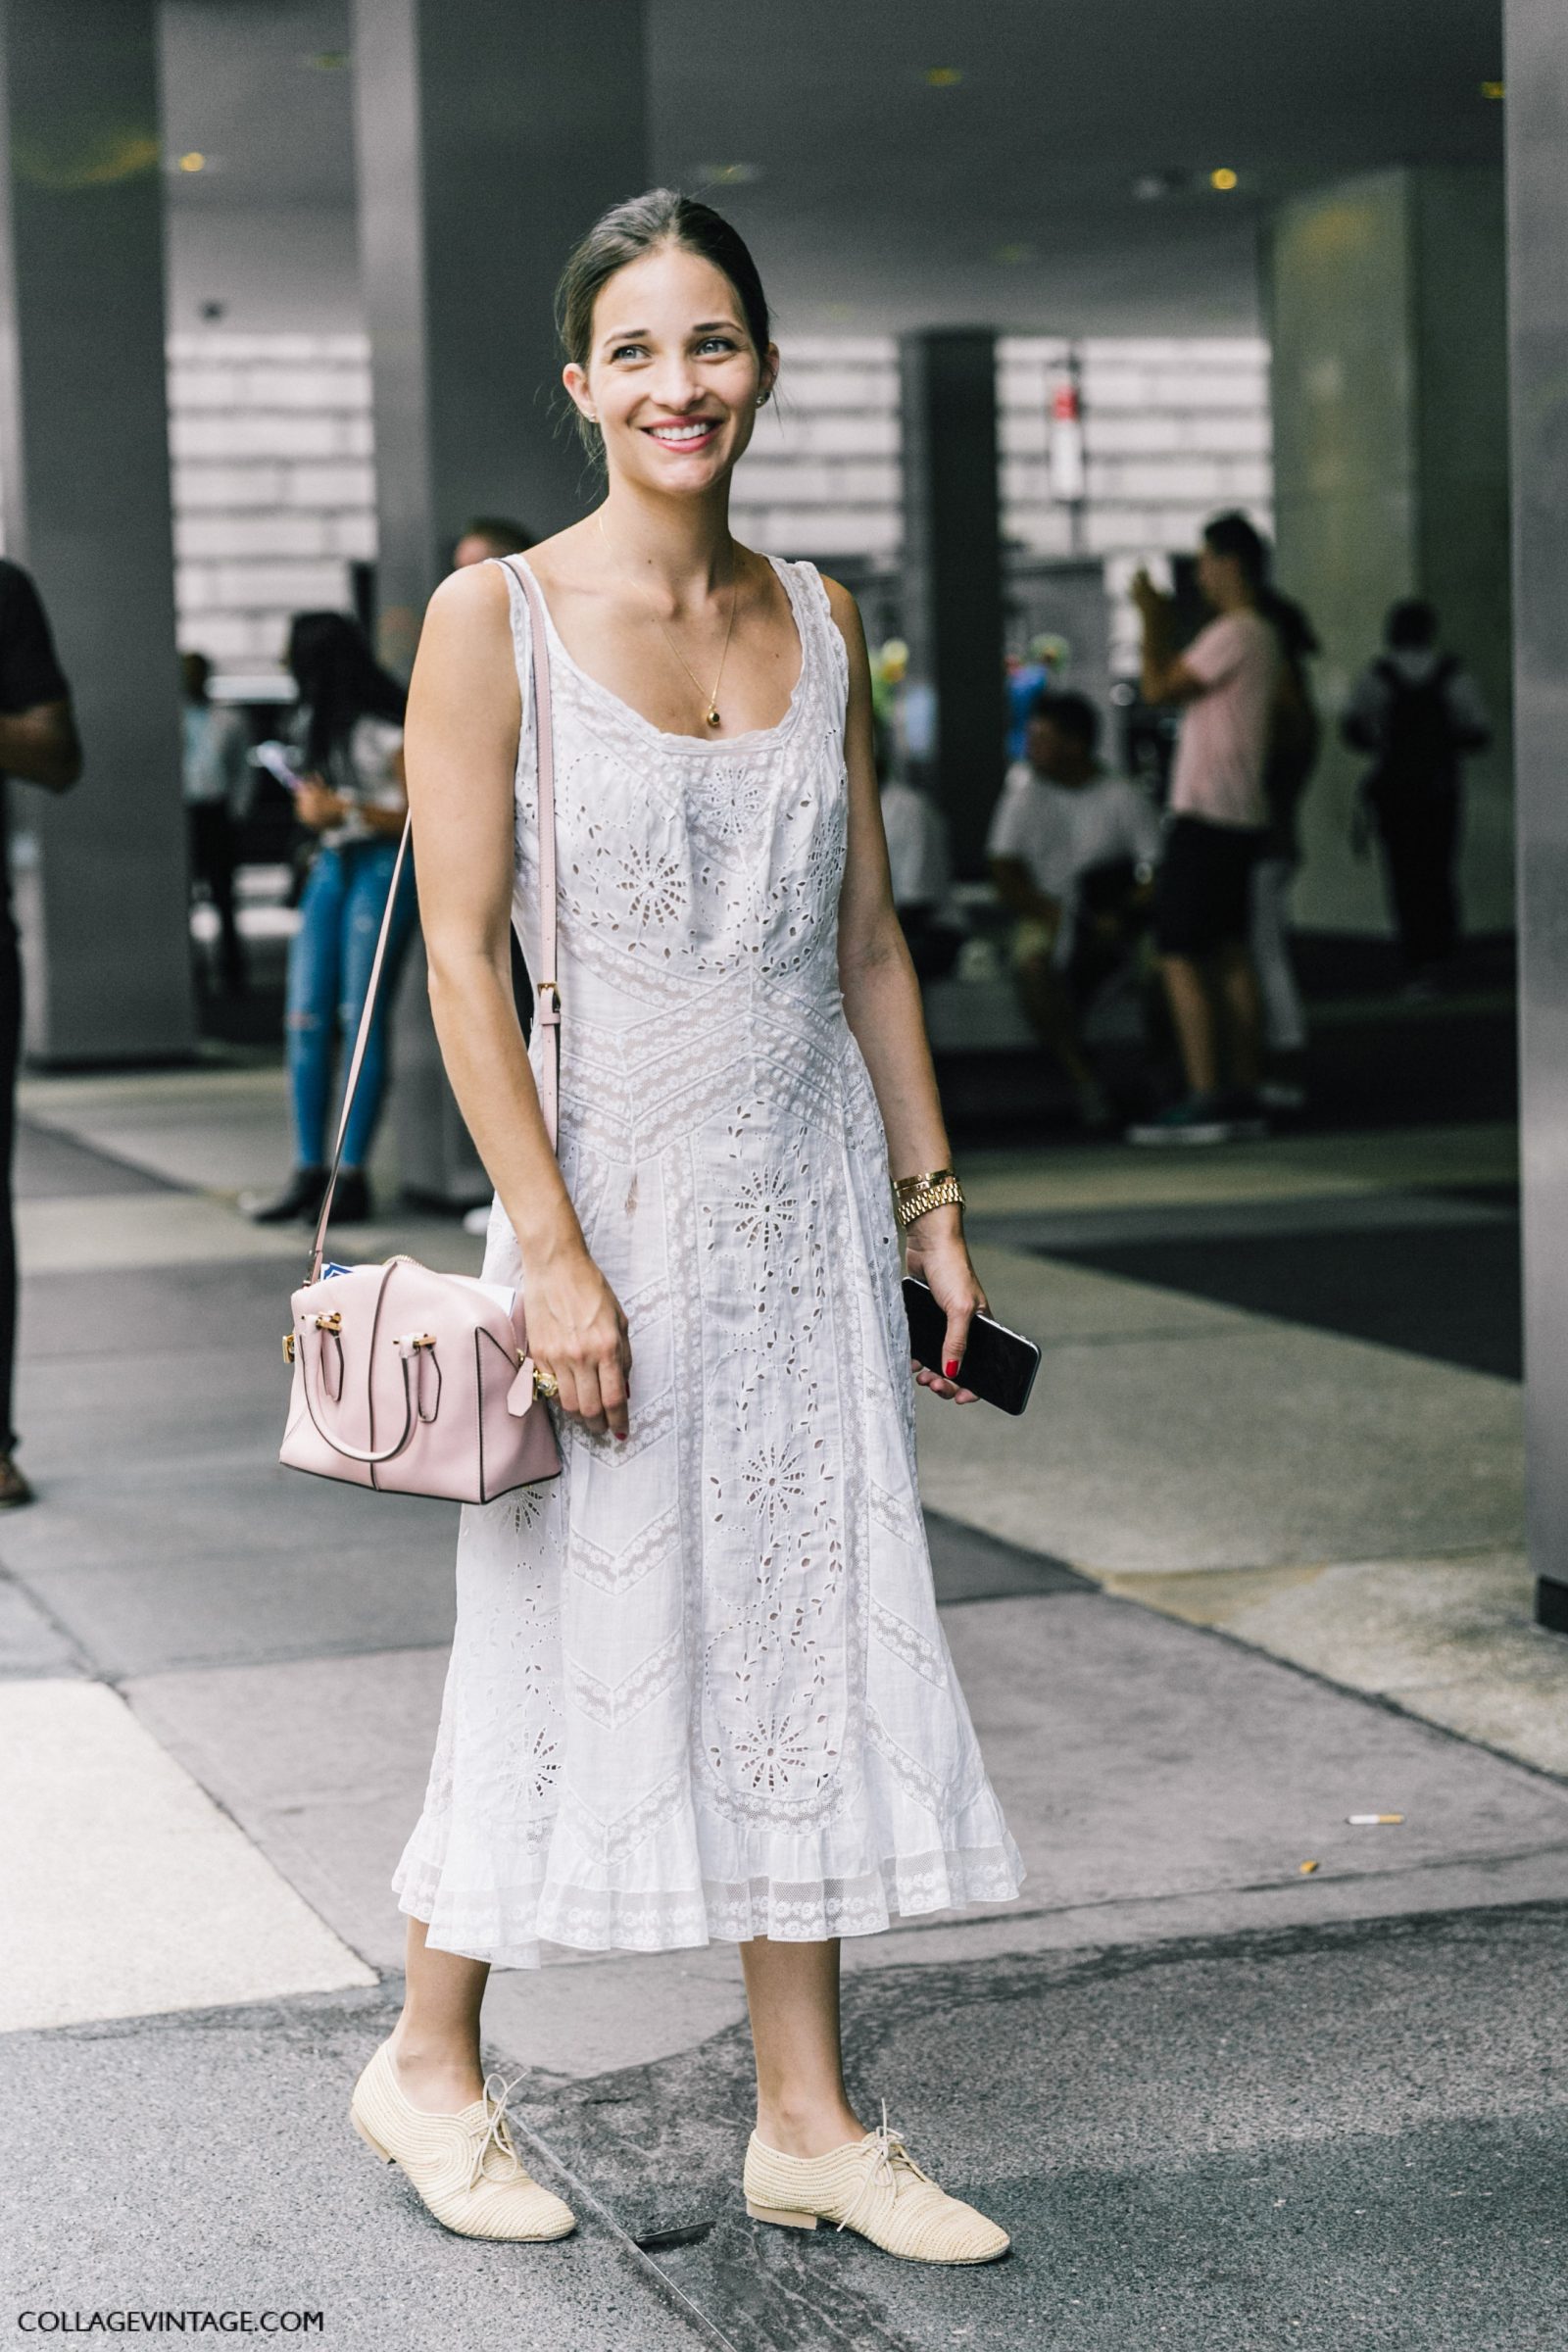 nyfw-new_york_fashion_week_ss17-street_style-outfits-collage_vintage-maria_duenas_jacobs